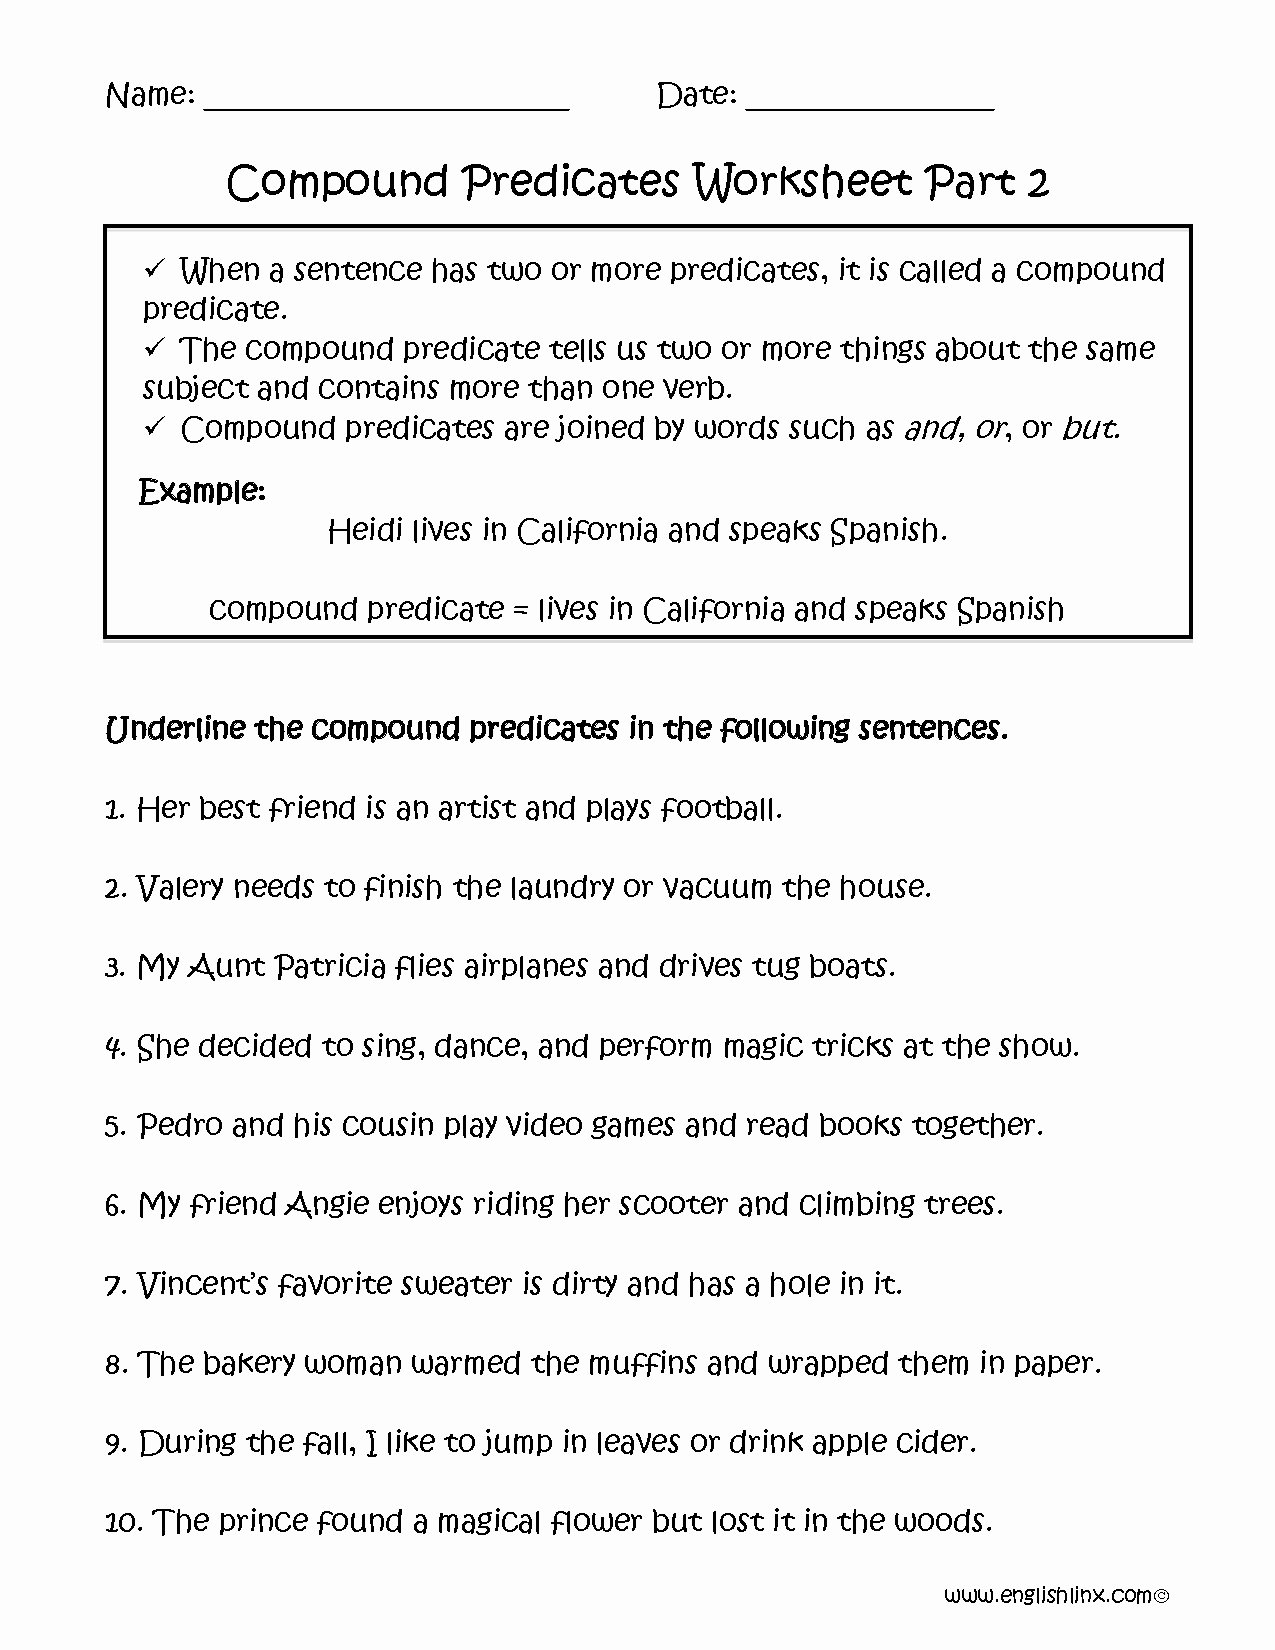 Free Subject and Predicate Worksheets Lovely Pound Predicate Worksheet Part 2